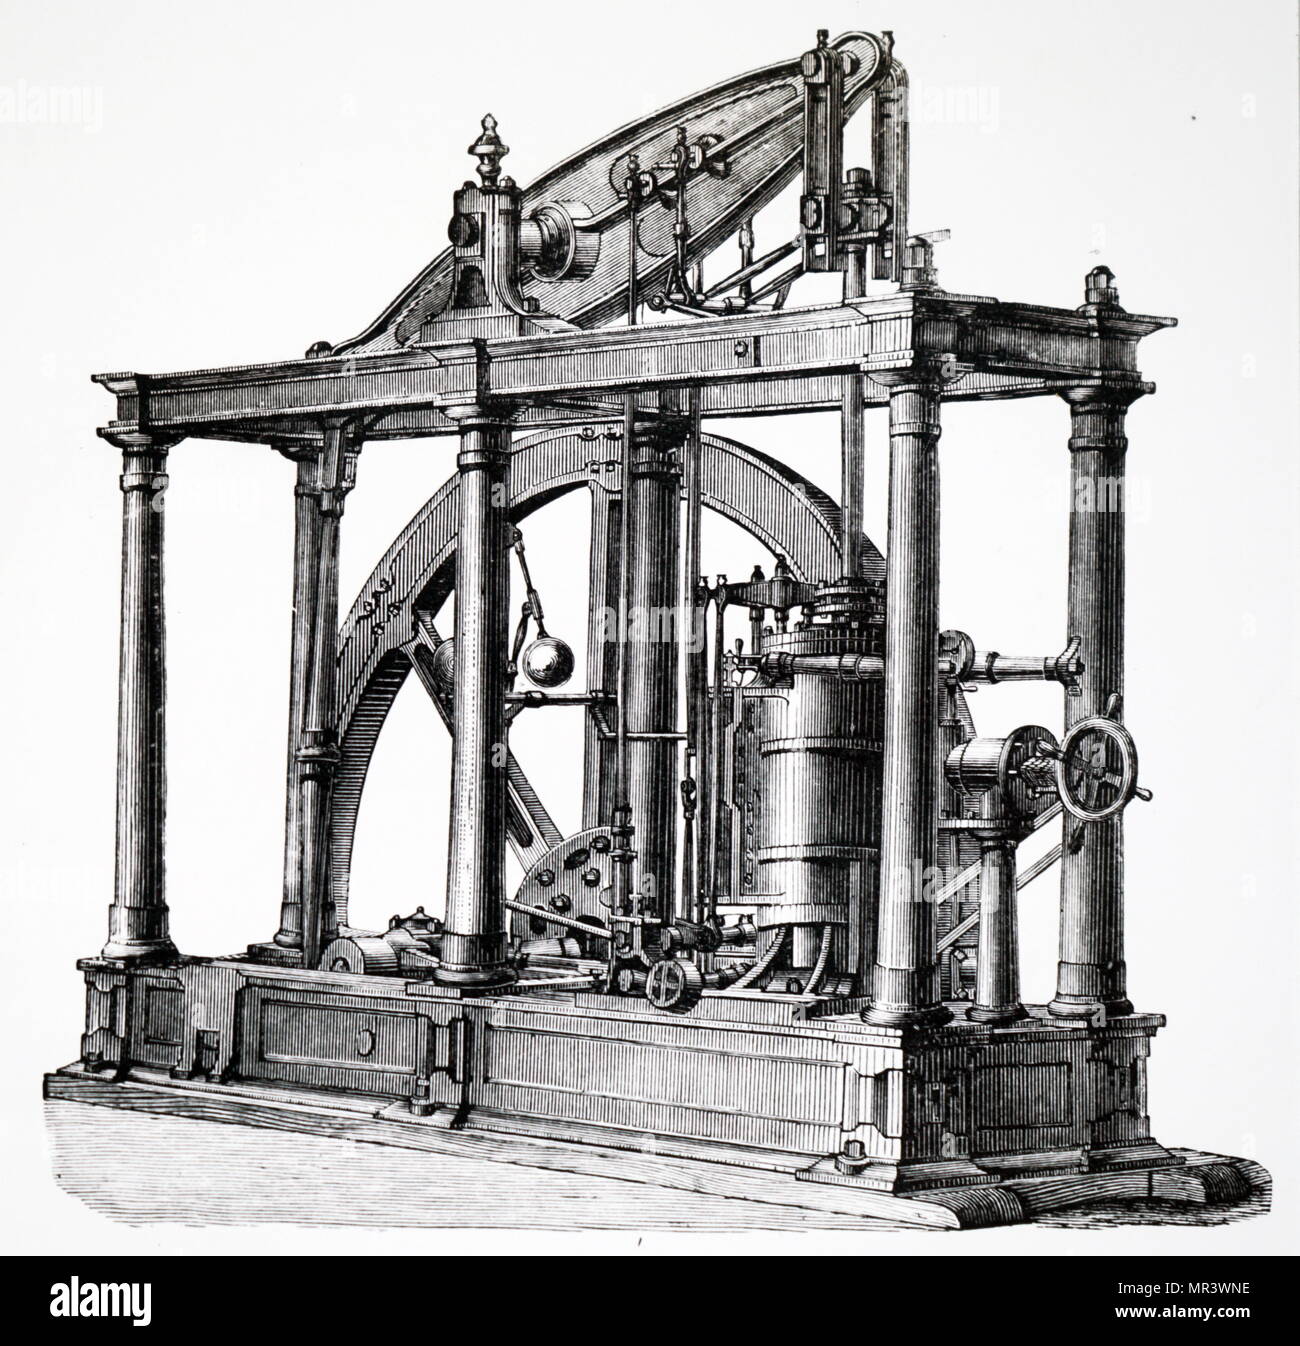 Illustration depicting a beam engine with compound cylinders. Dated 19th century Stock Photo